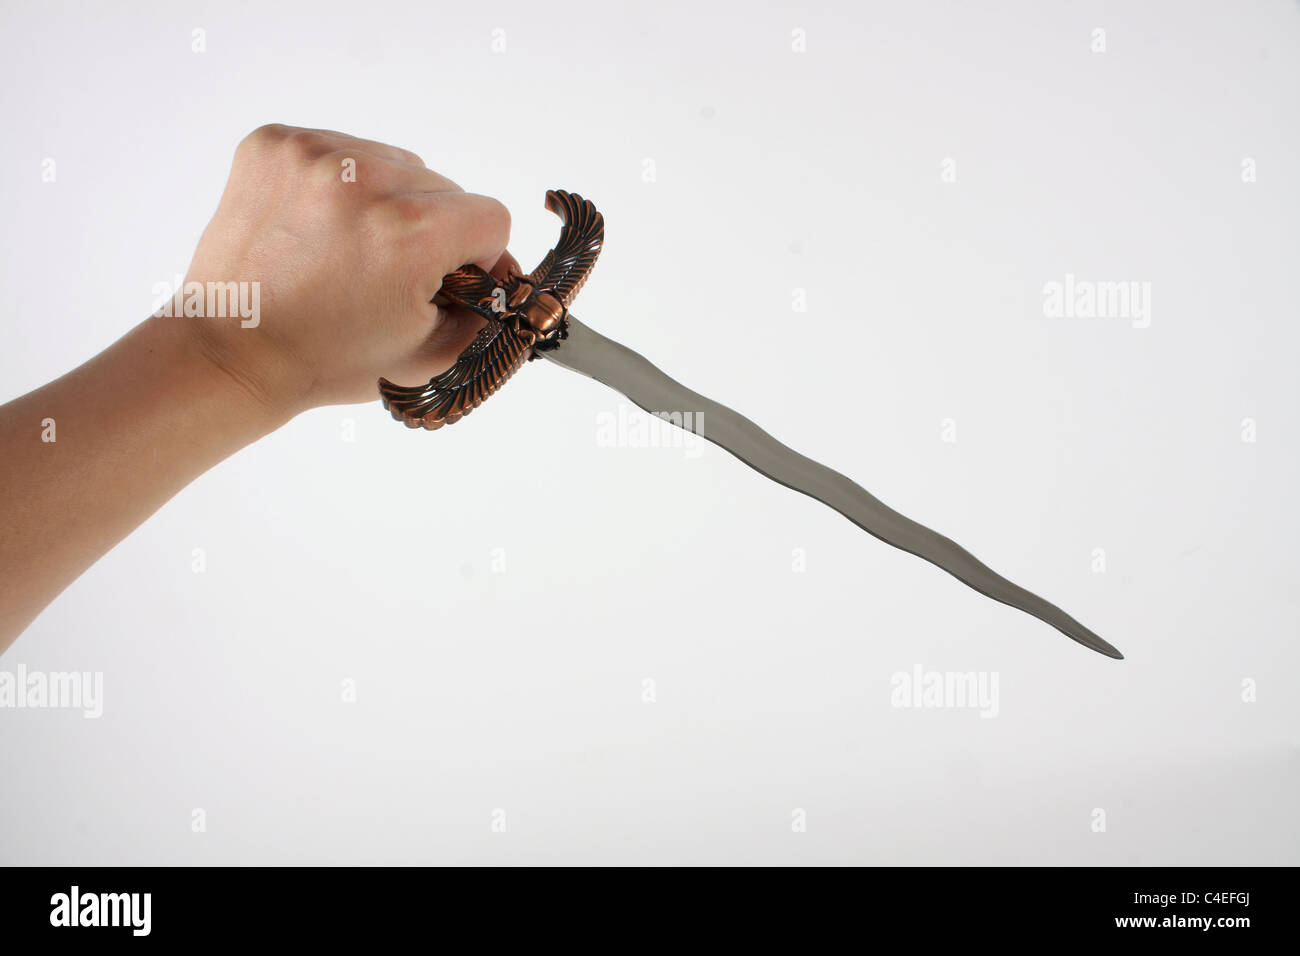 Holding a lock knife and demonstrating its use as a lethal weapon. A knife has a sharp blade usually made of stainless steel. Stock Photo